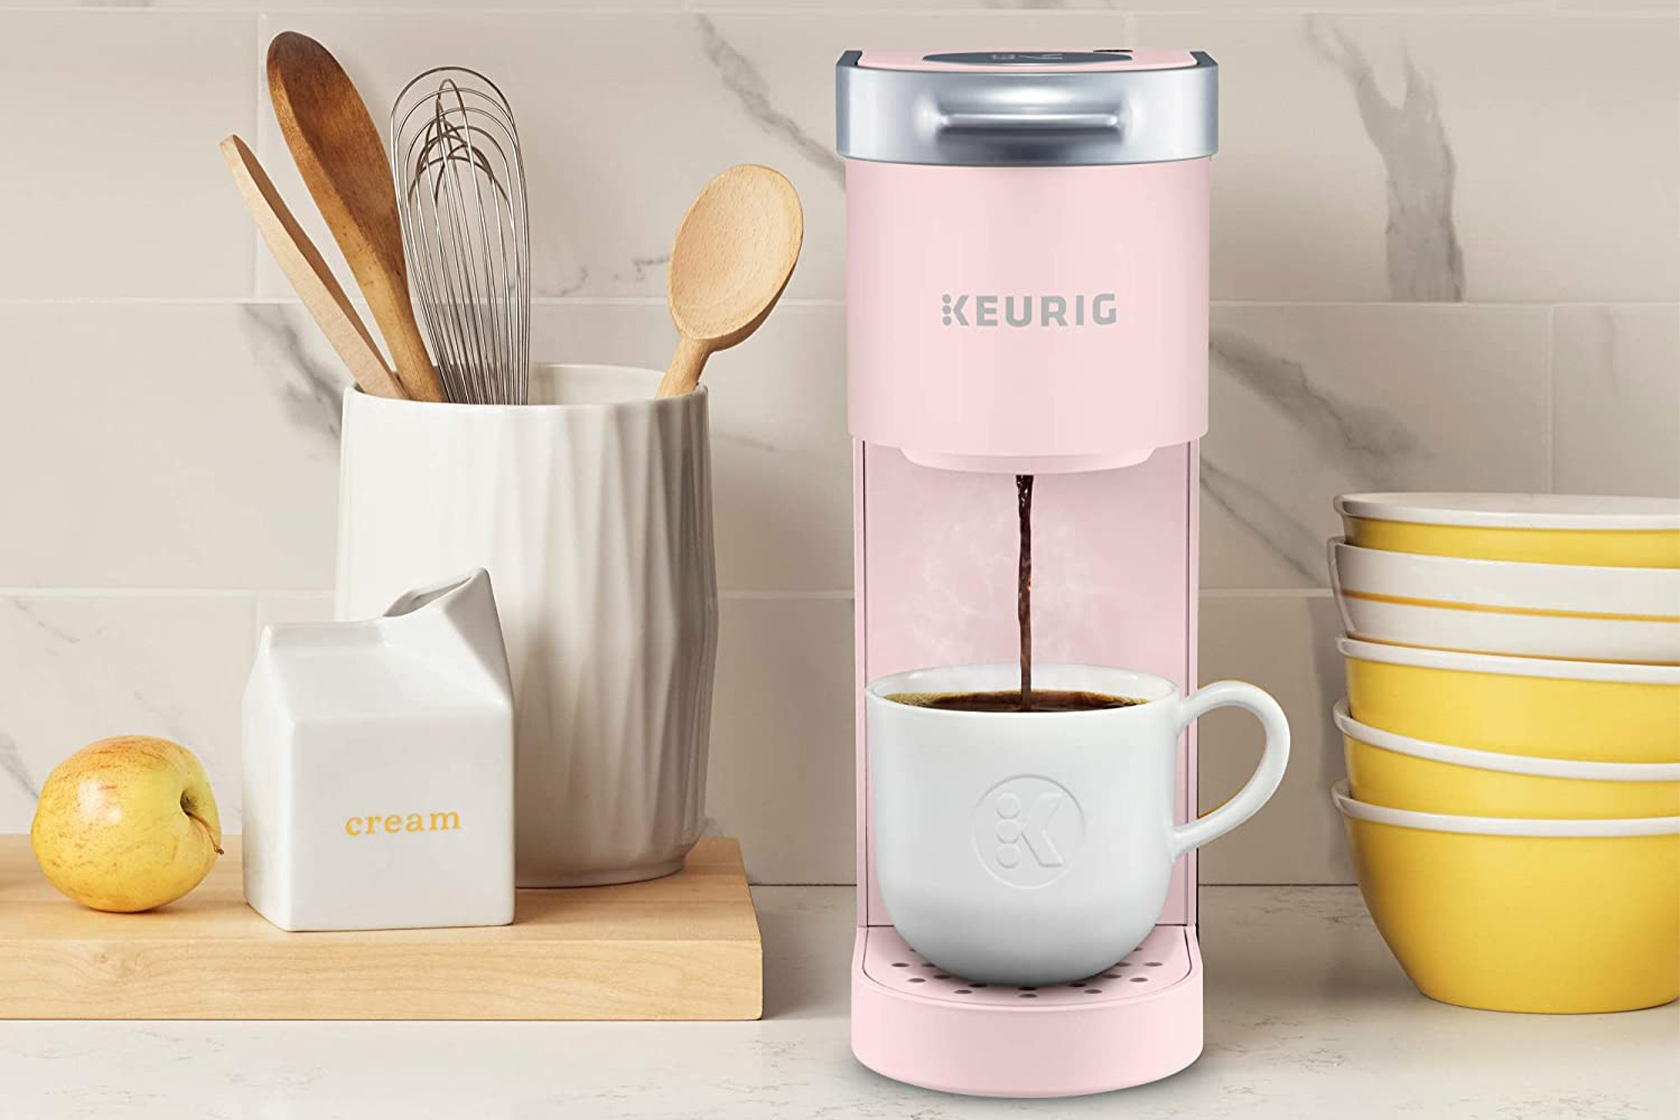 These colorful Keurig K-Mini coffee makers are 50% on Amazon